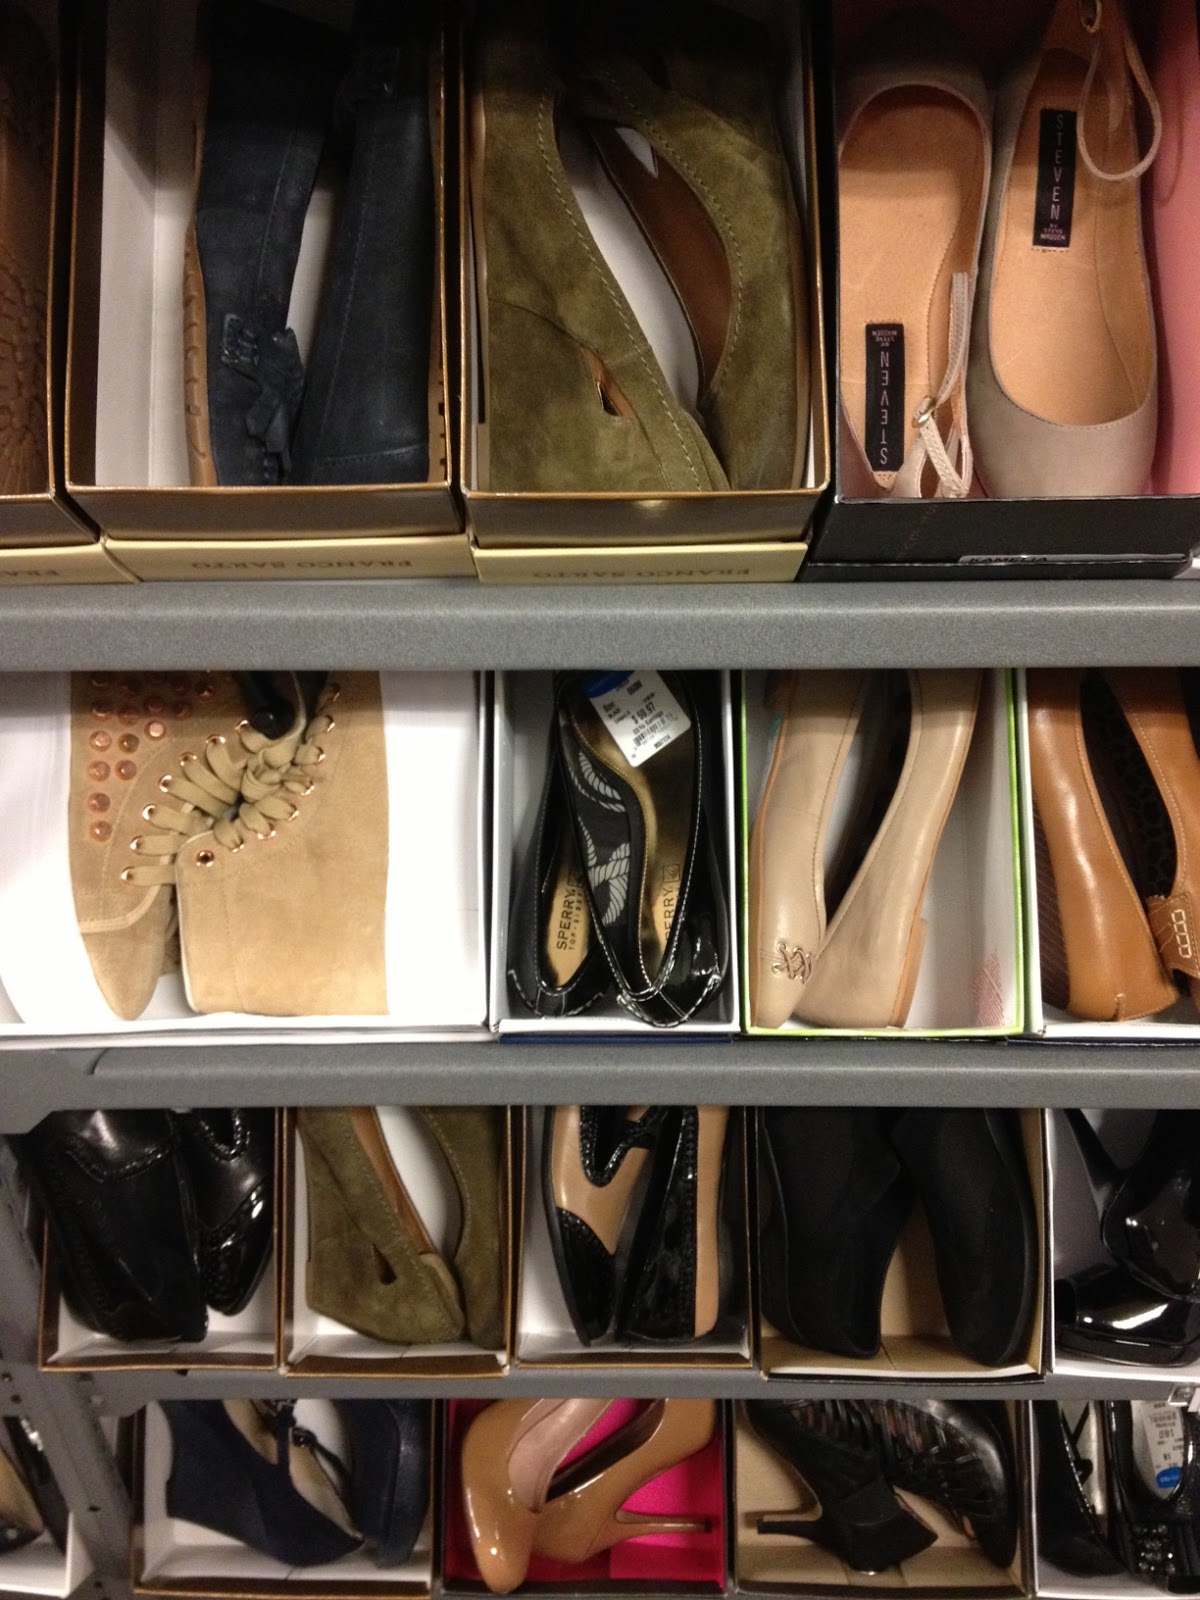 Seattle: Nordstrom Rack at Northgate Opens Tomorrow, Thurs 11/8!